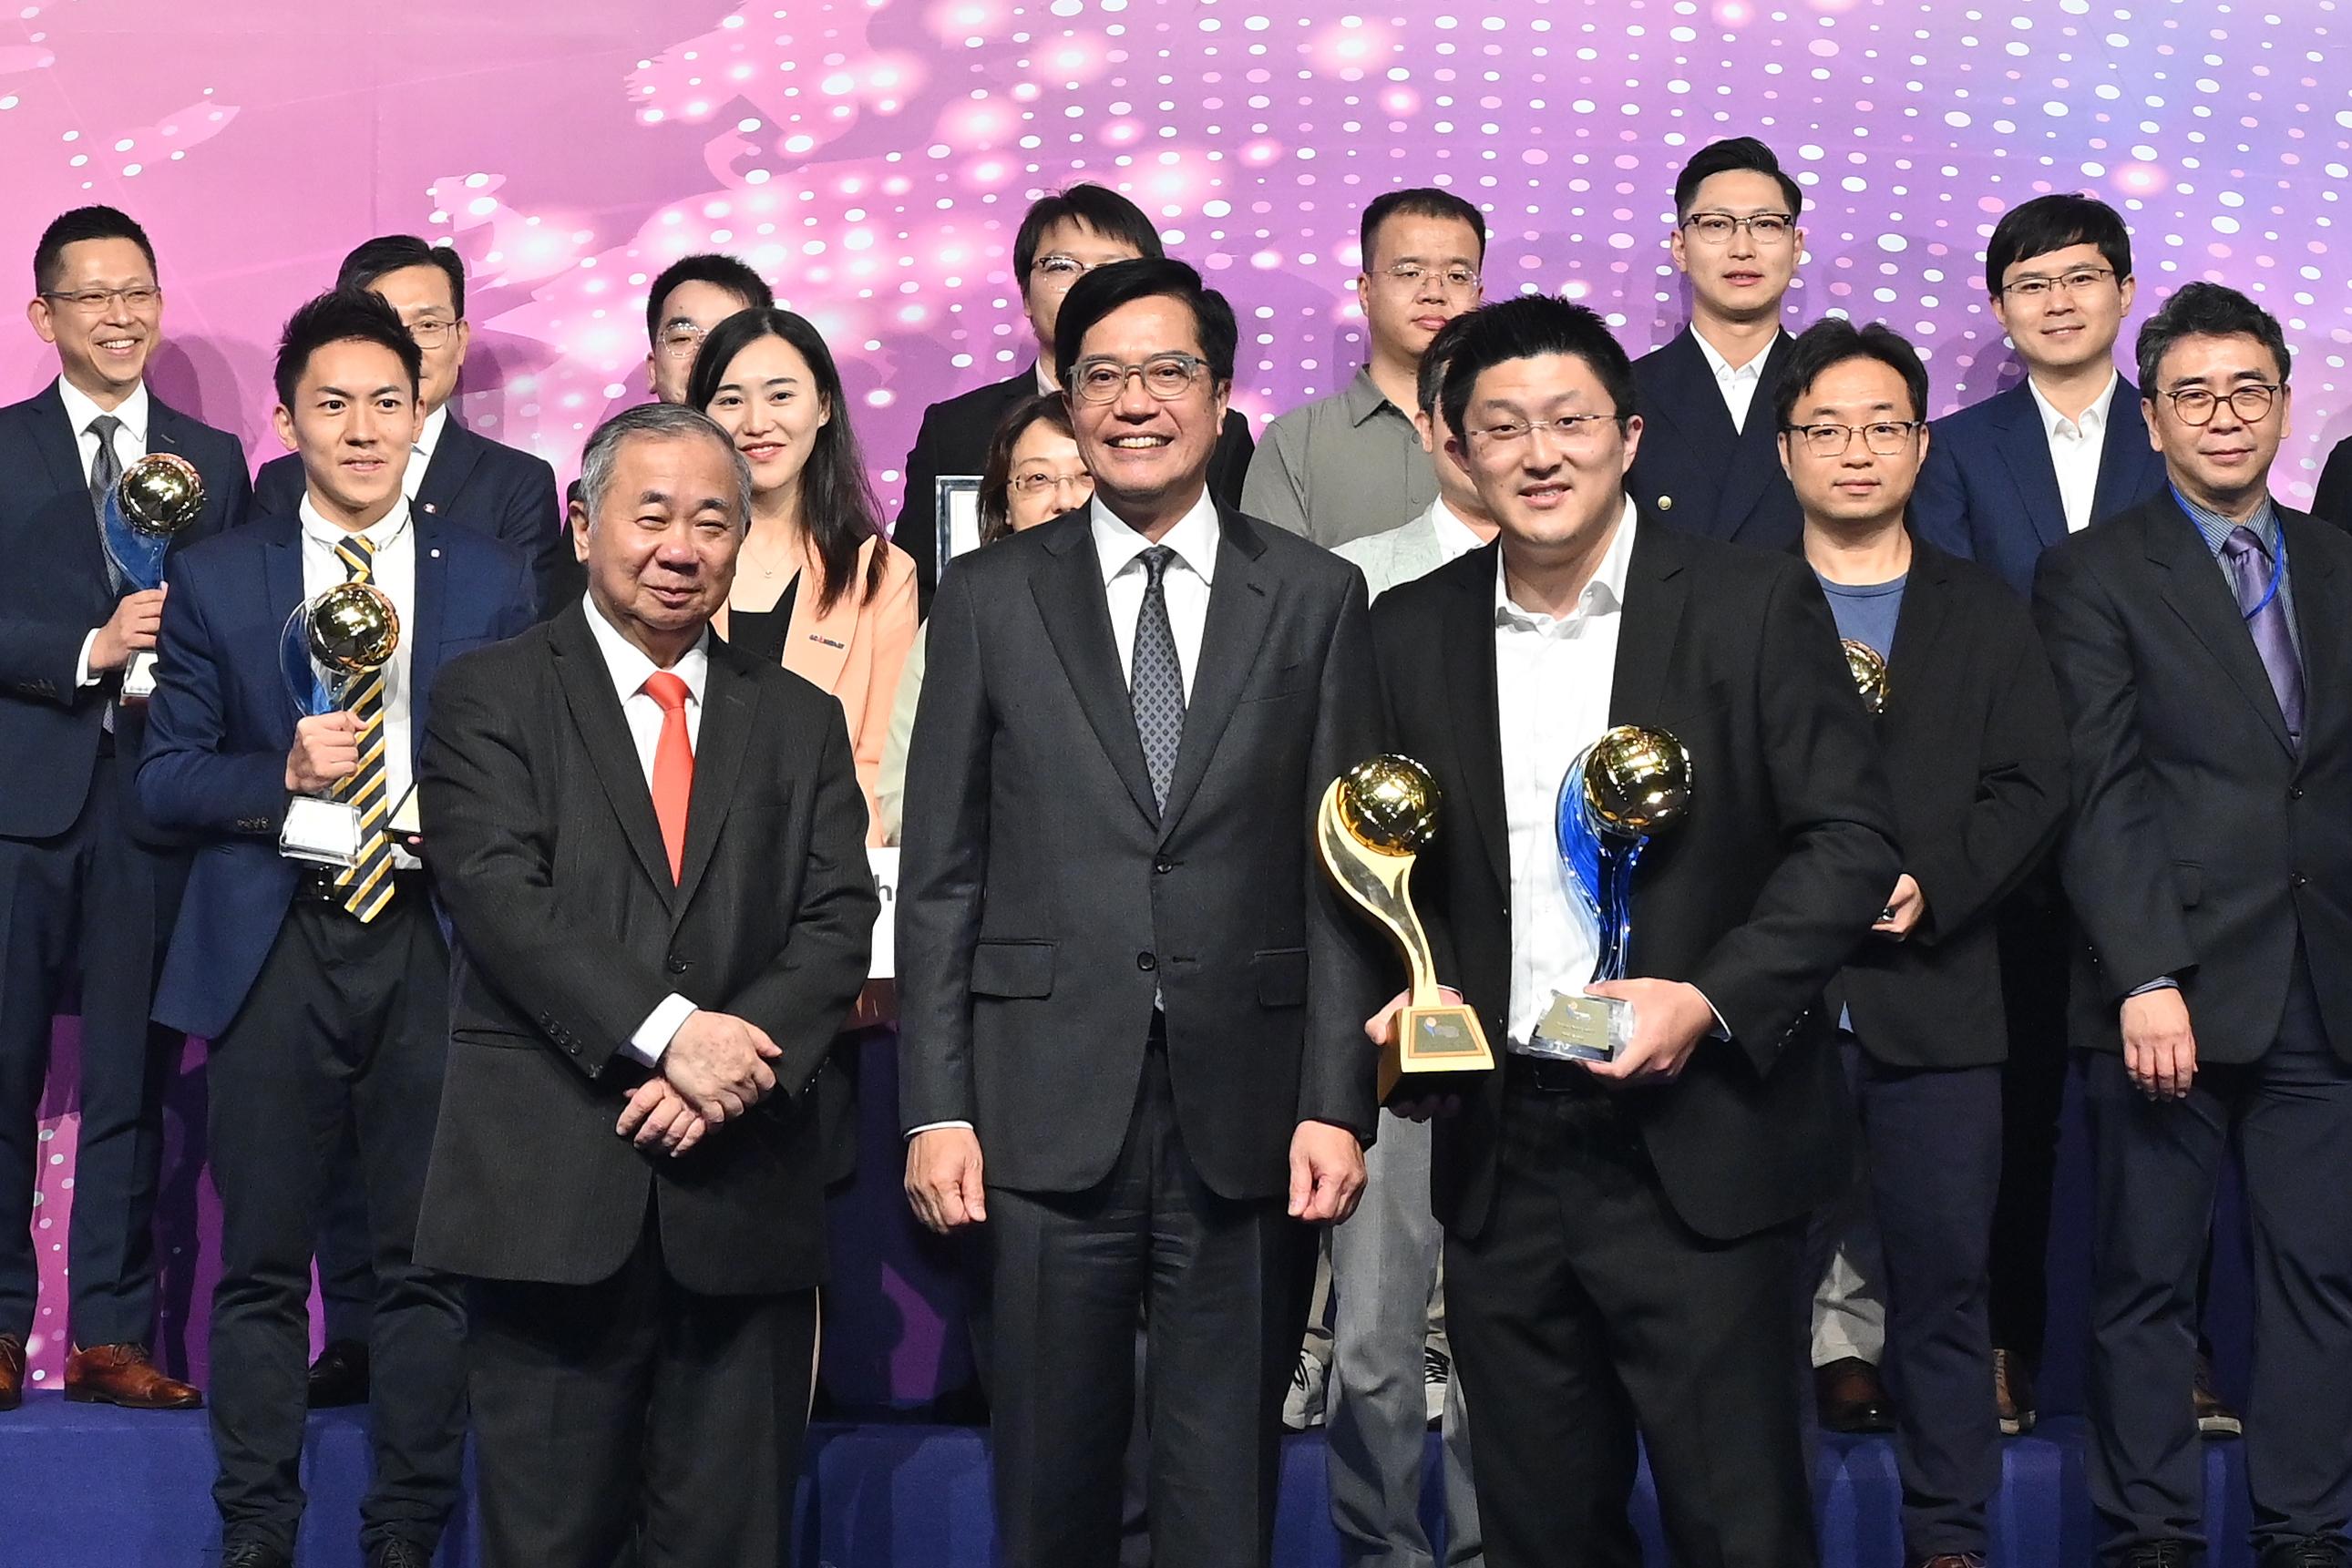 The Deputy Financial Secretary, Mr Michael Wong (front row, centre), presents the Award of the Year at the Hong Kong ICT Awards 2023 Awards Presentation Ceremony to KRIP Limited this evening (November 3). The Chairman of the Hong Kong ICT Awards 2023 Grand Judging Panel, the President of City University of Hong Kong, Professor Freddy Boey (front row, left), is also present.